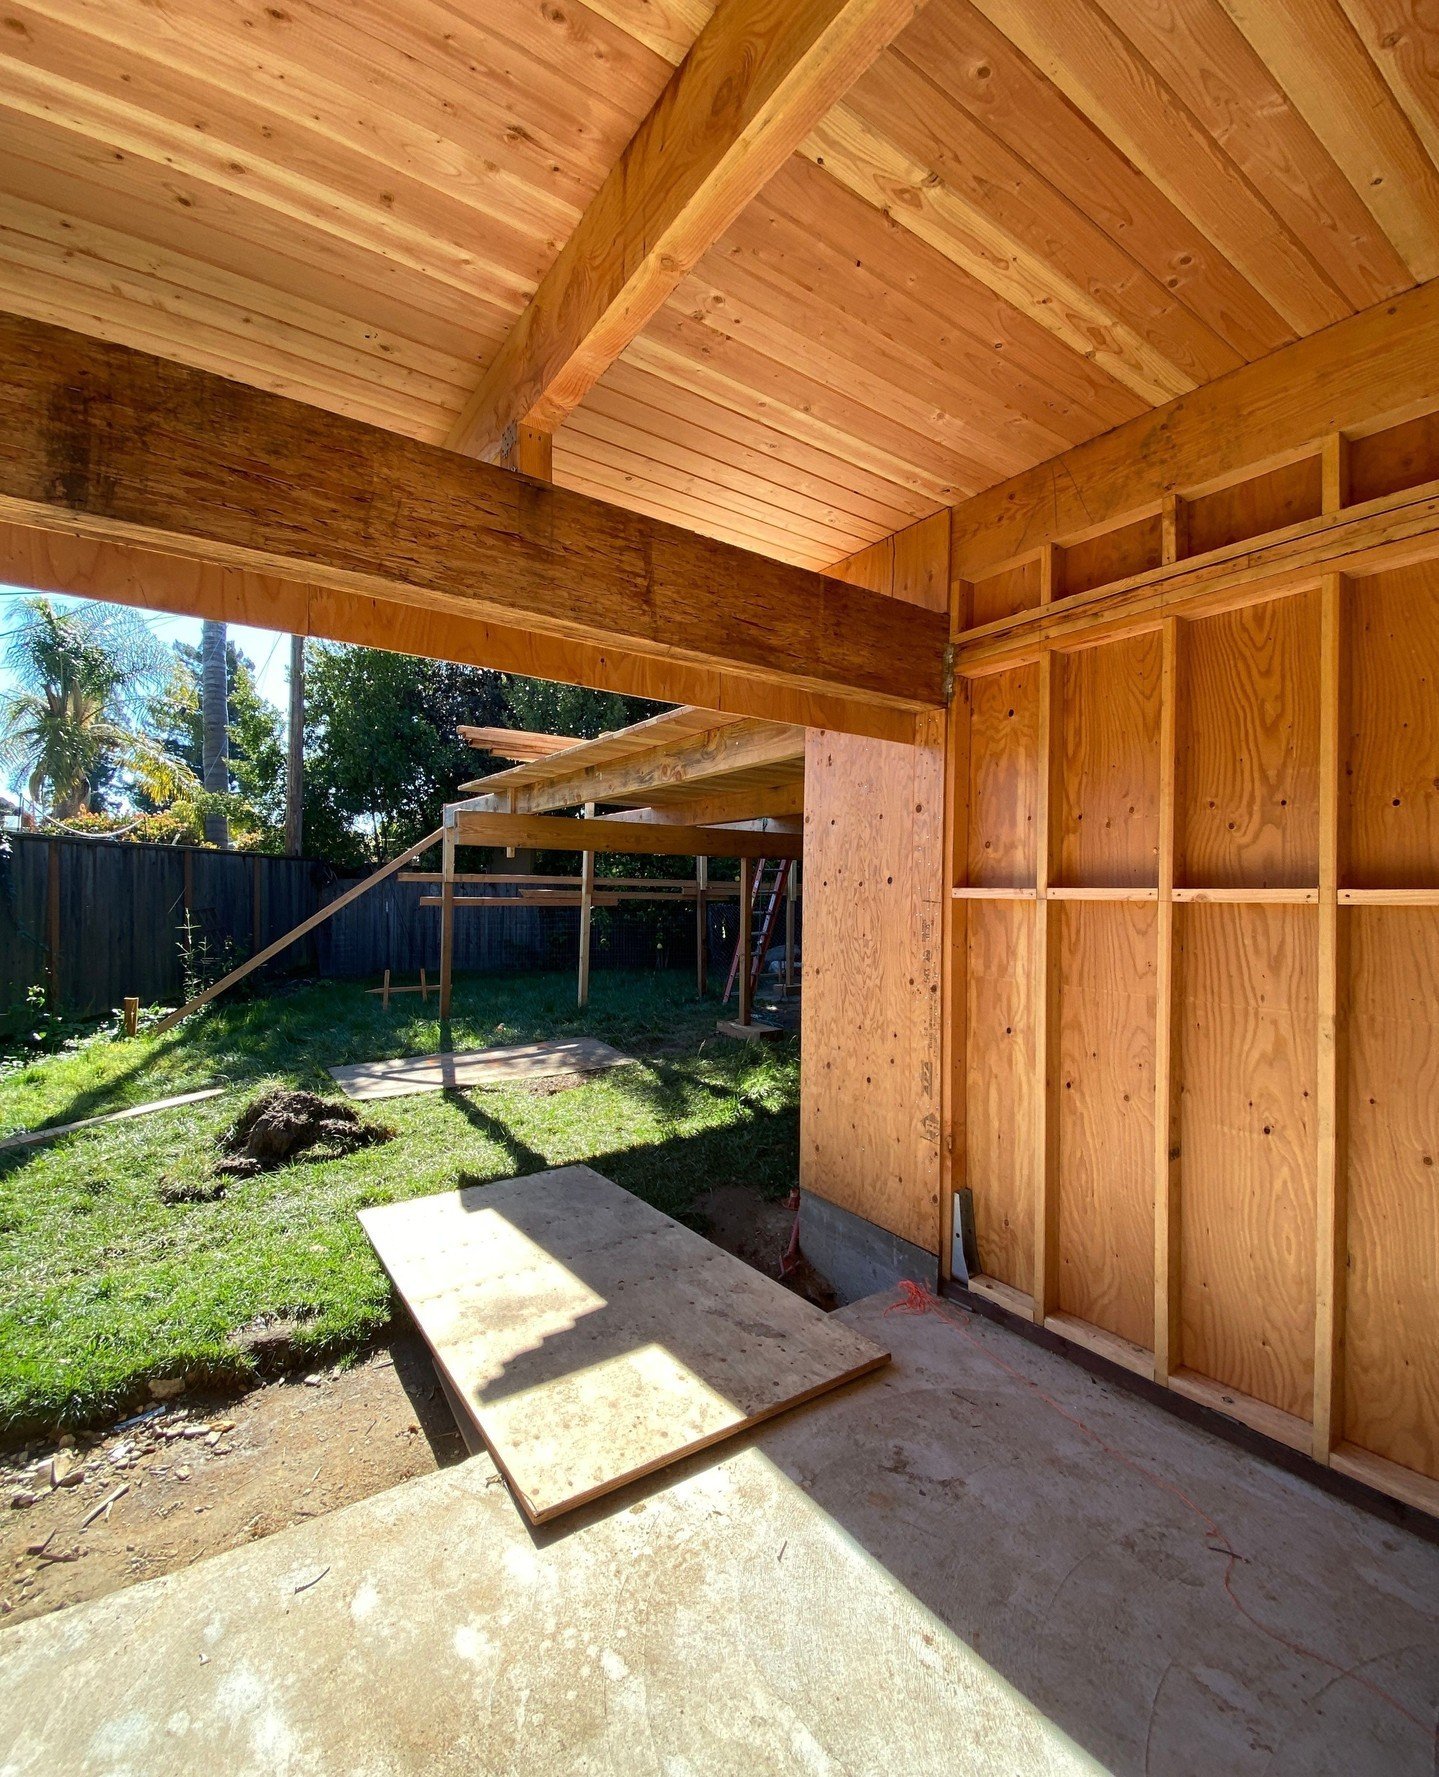 ⚒️ Lots of progress on our Eichler remodel and addition. It's always so beautiful and exciting while the raw wood is exposed and the rooms are taking shape. ✨️⁠
⁠
Big thanks to Coast to Coast Development for their beautiful hard work! 👷🏻⁠
⁠
#ogawaf